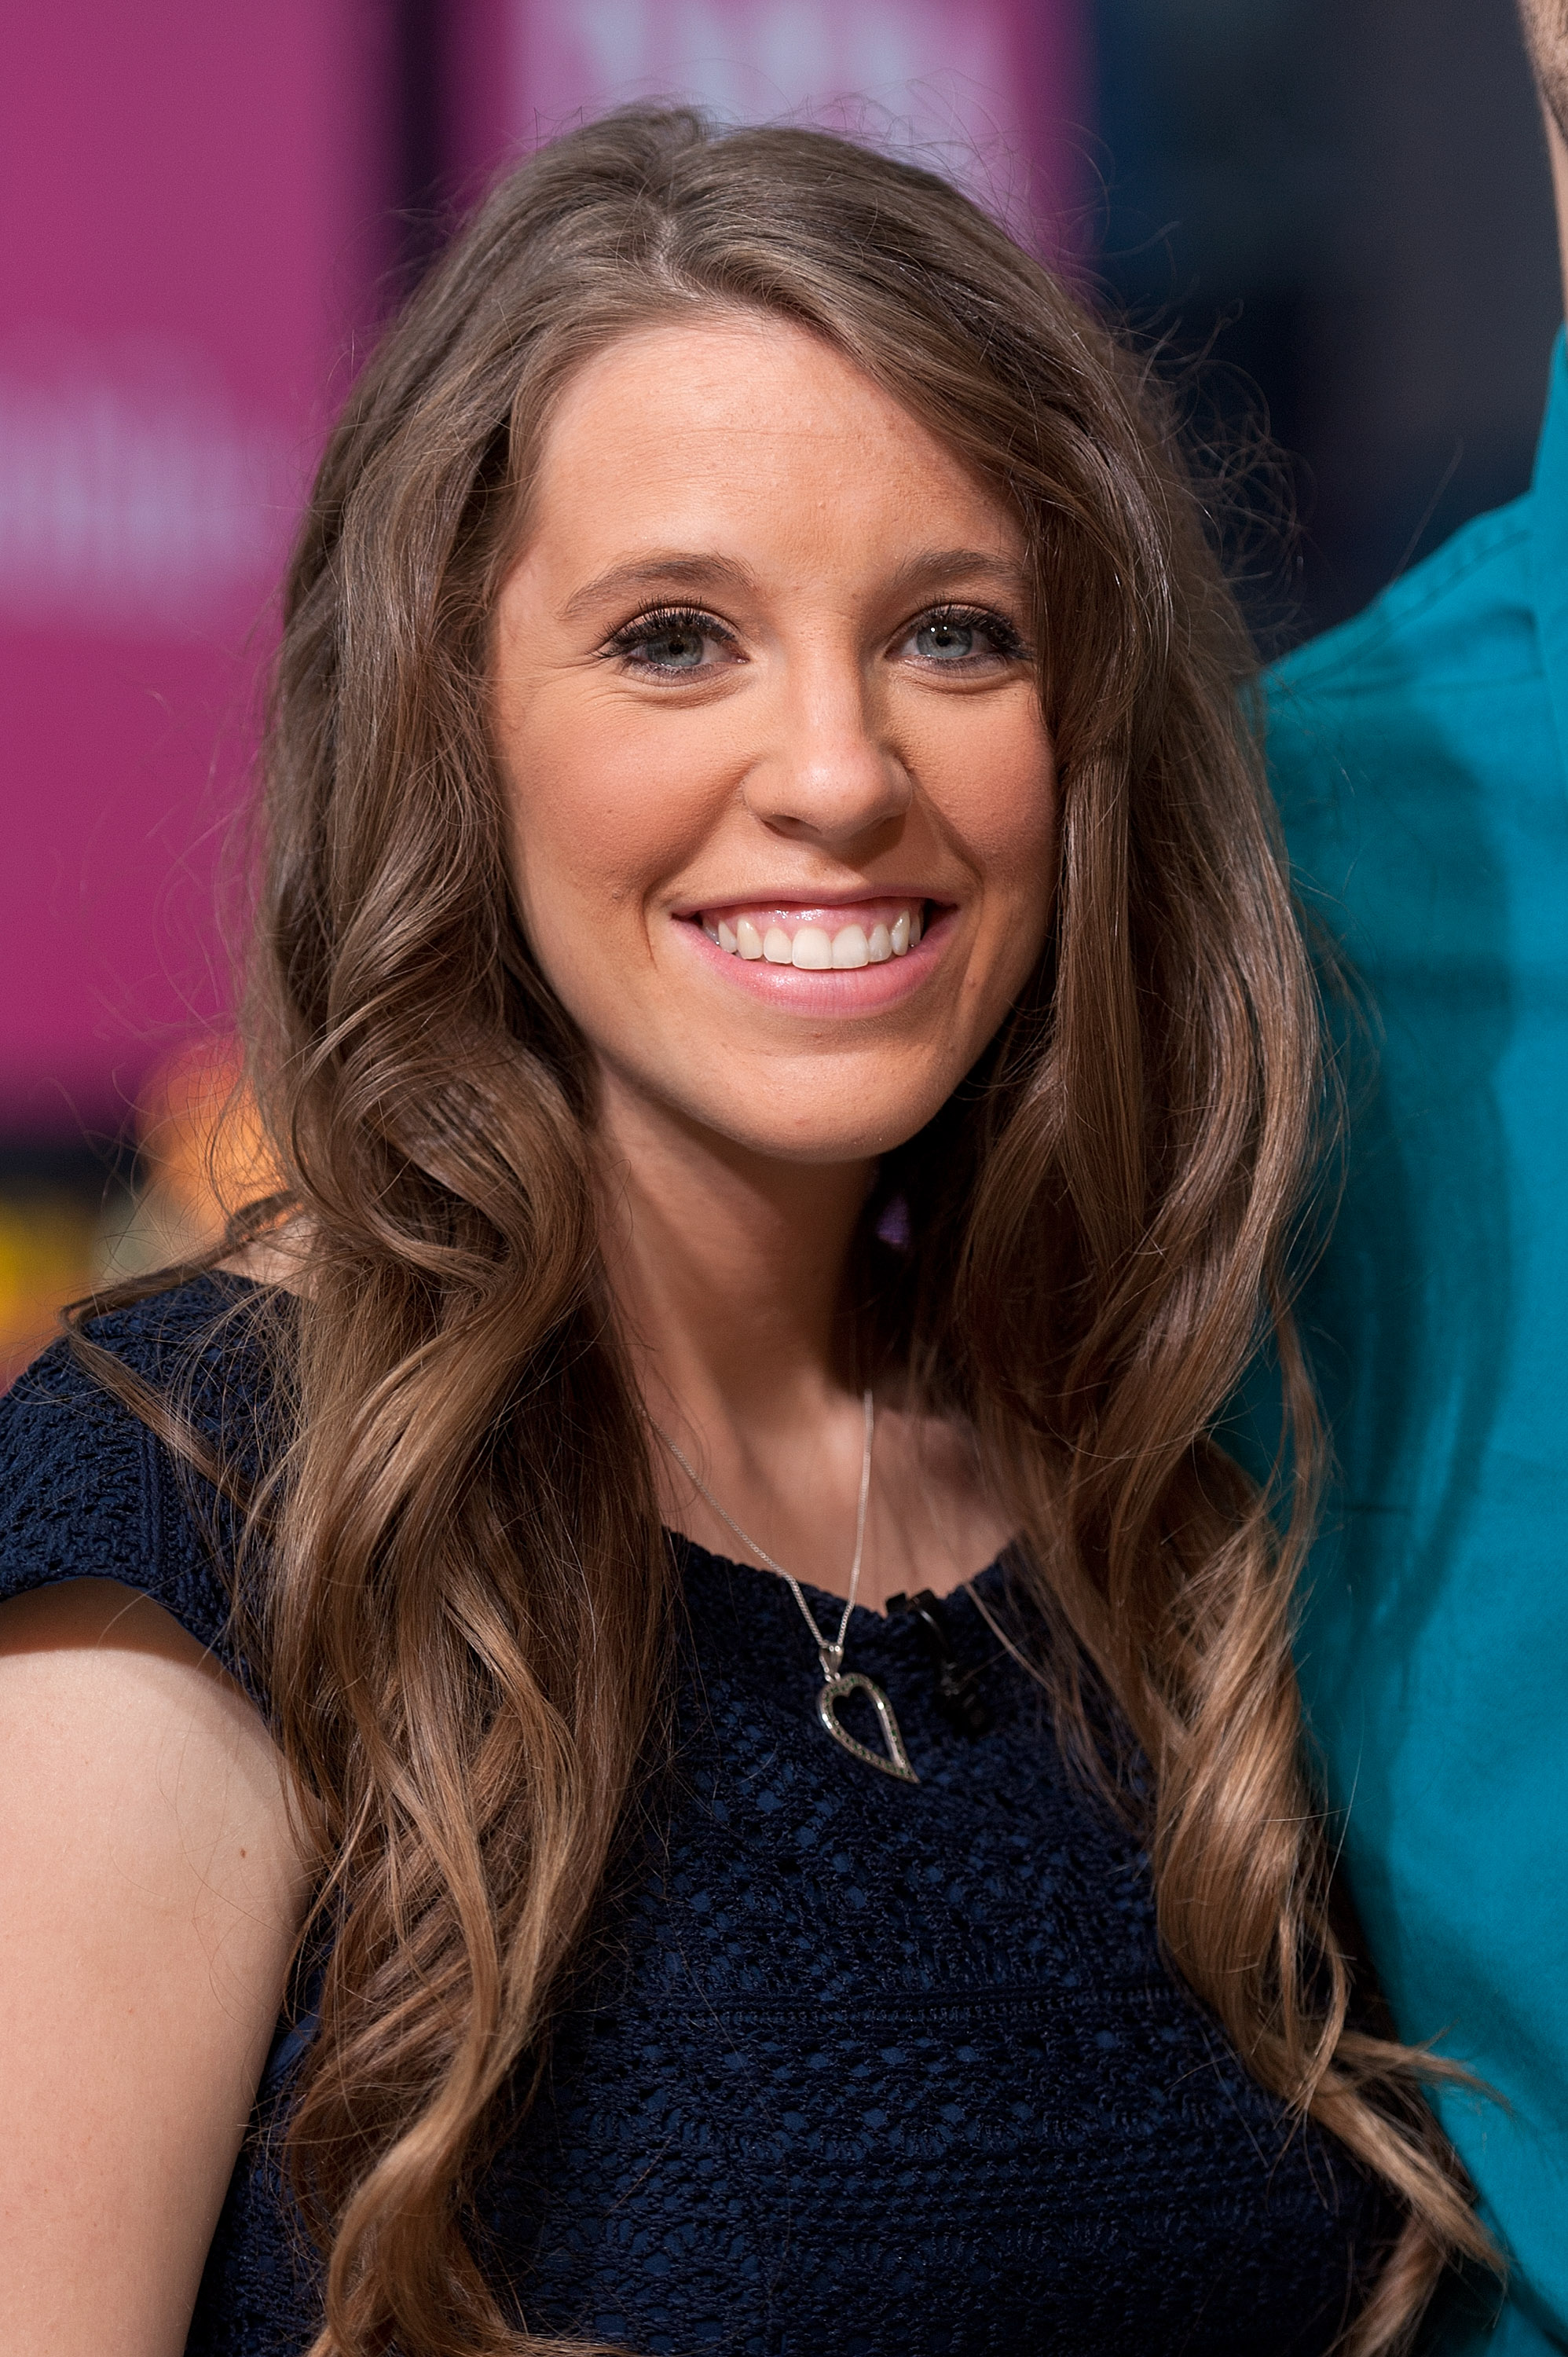 Jill Duggar Dillard visits "Extra" studios at H&M in Times Square in New York City, on October 23, 2014. | Source: Getty Images